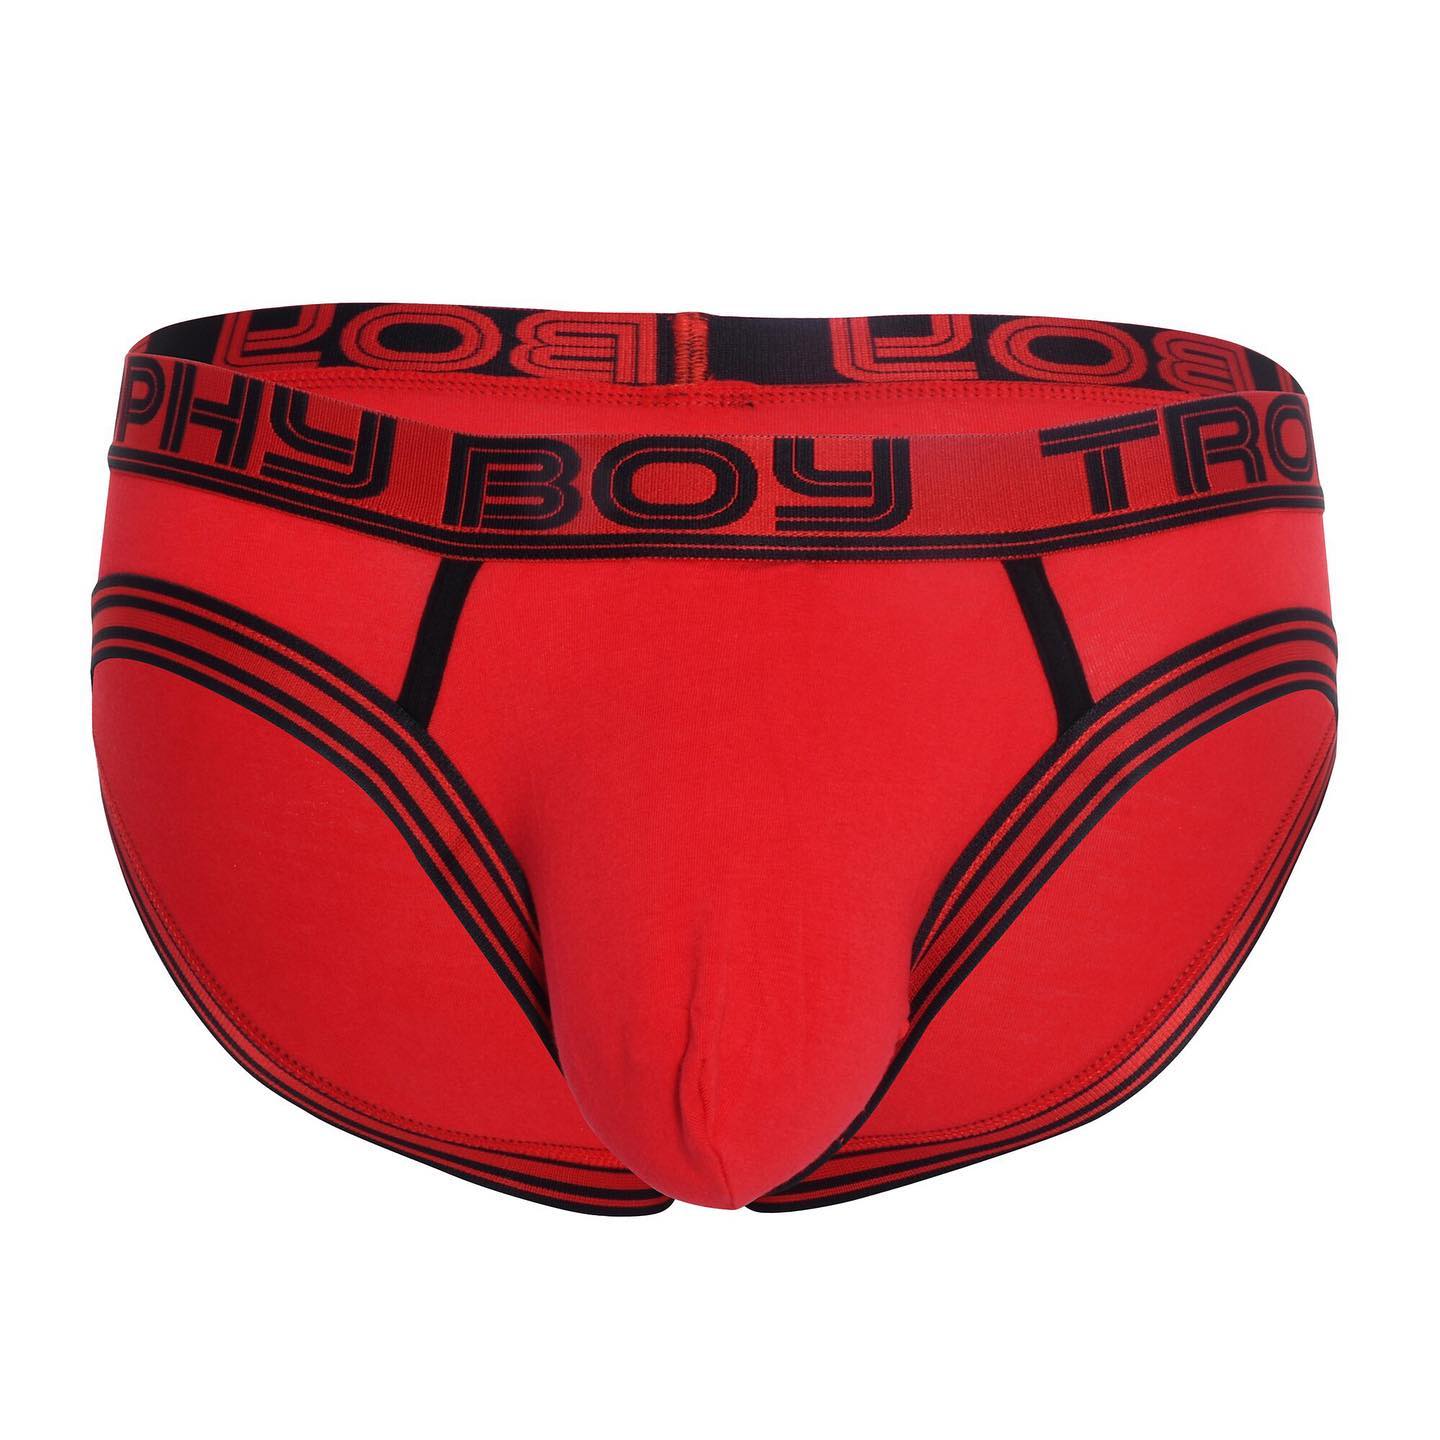 Our underwear suggestion today is the Trophy Boy briefs in red by Andrew Christian. Would you wear it?
______
http://www.menandunderwear.com/2022/05/underwear-suggestion-andrew-christian-trophy-boy-briefs-red.html